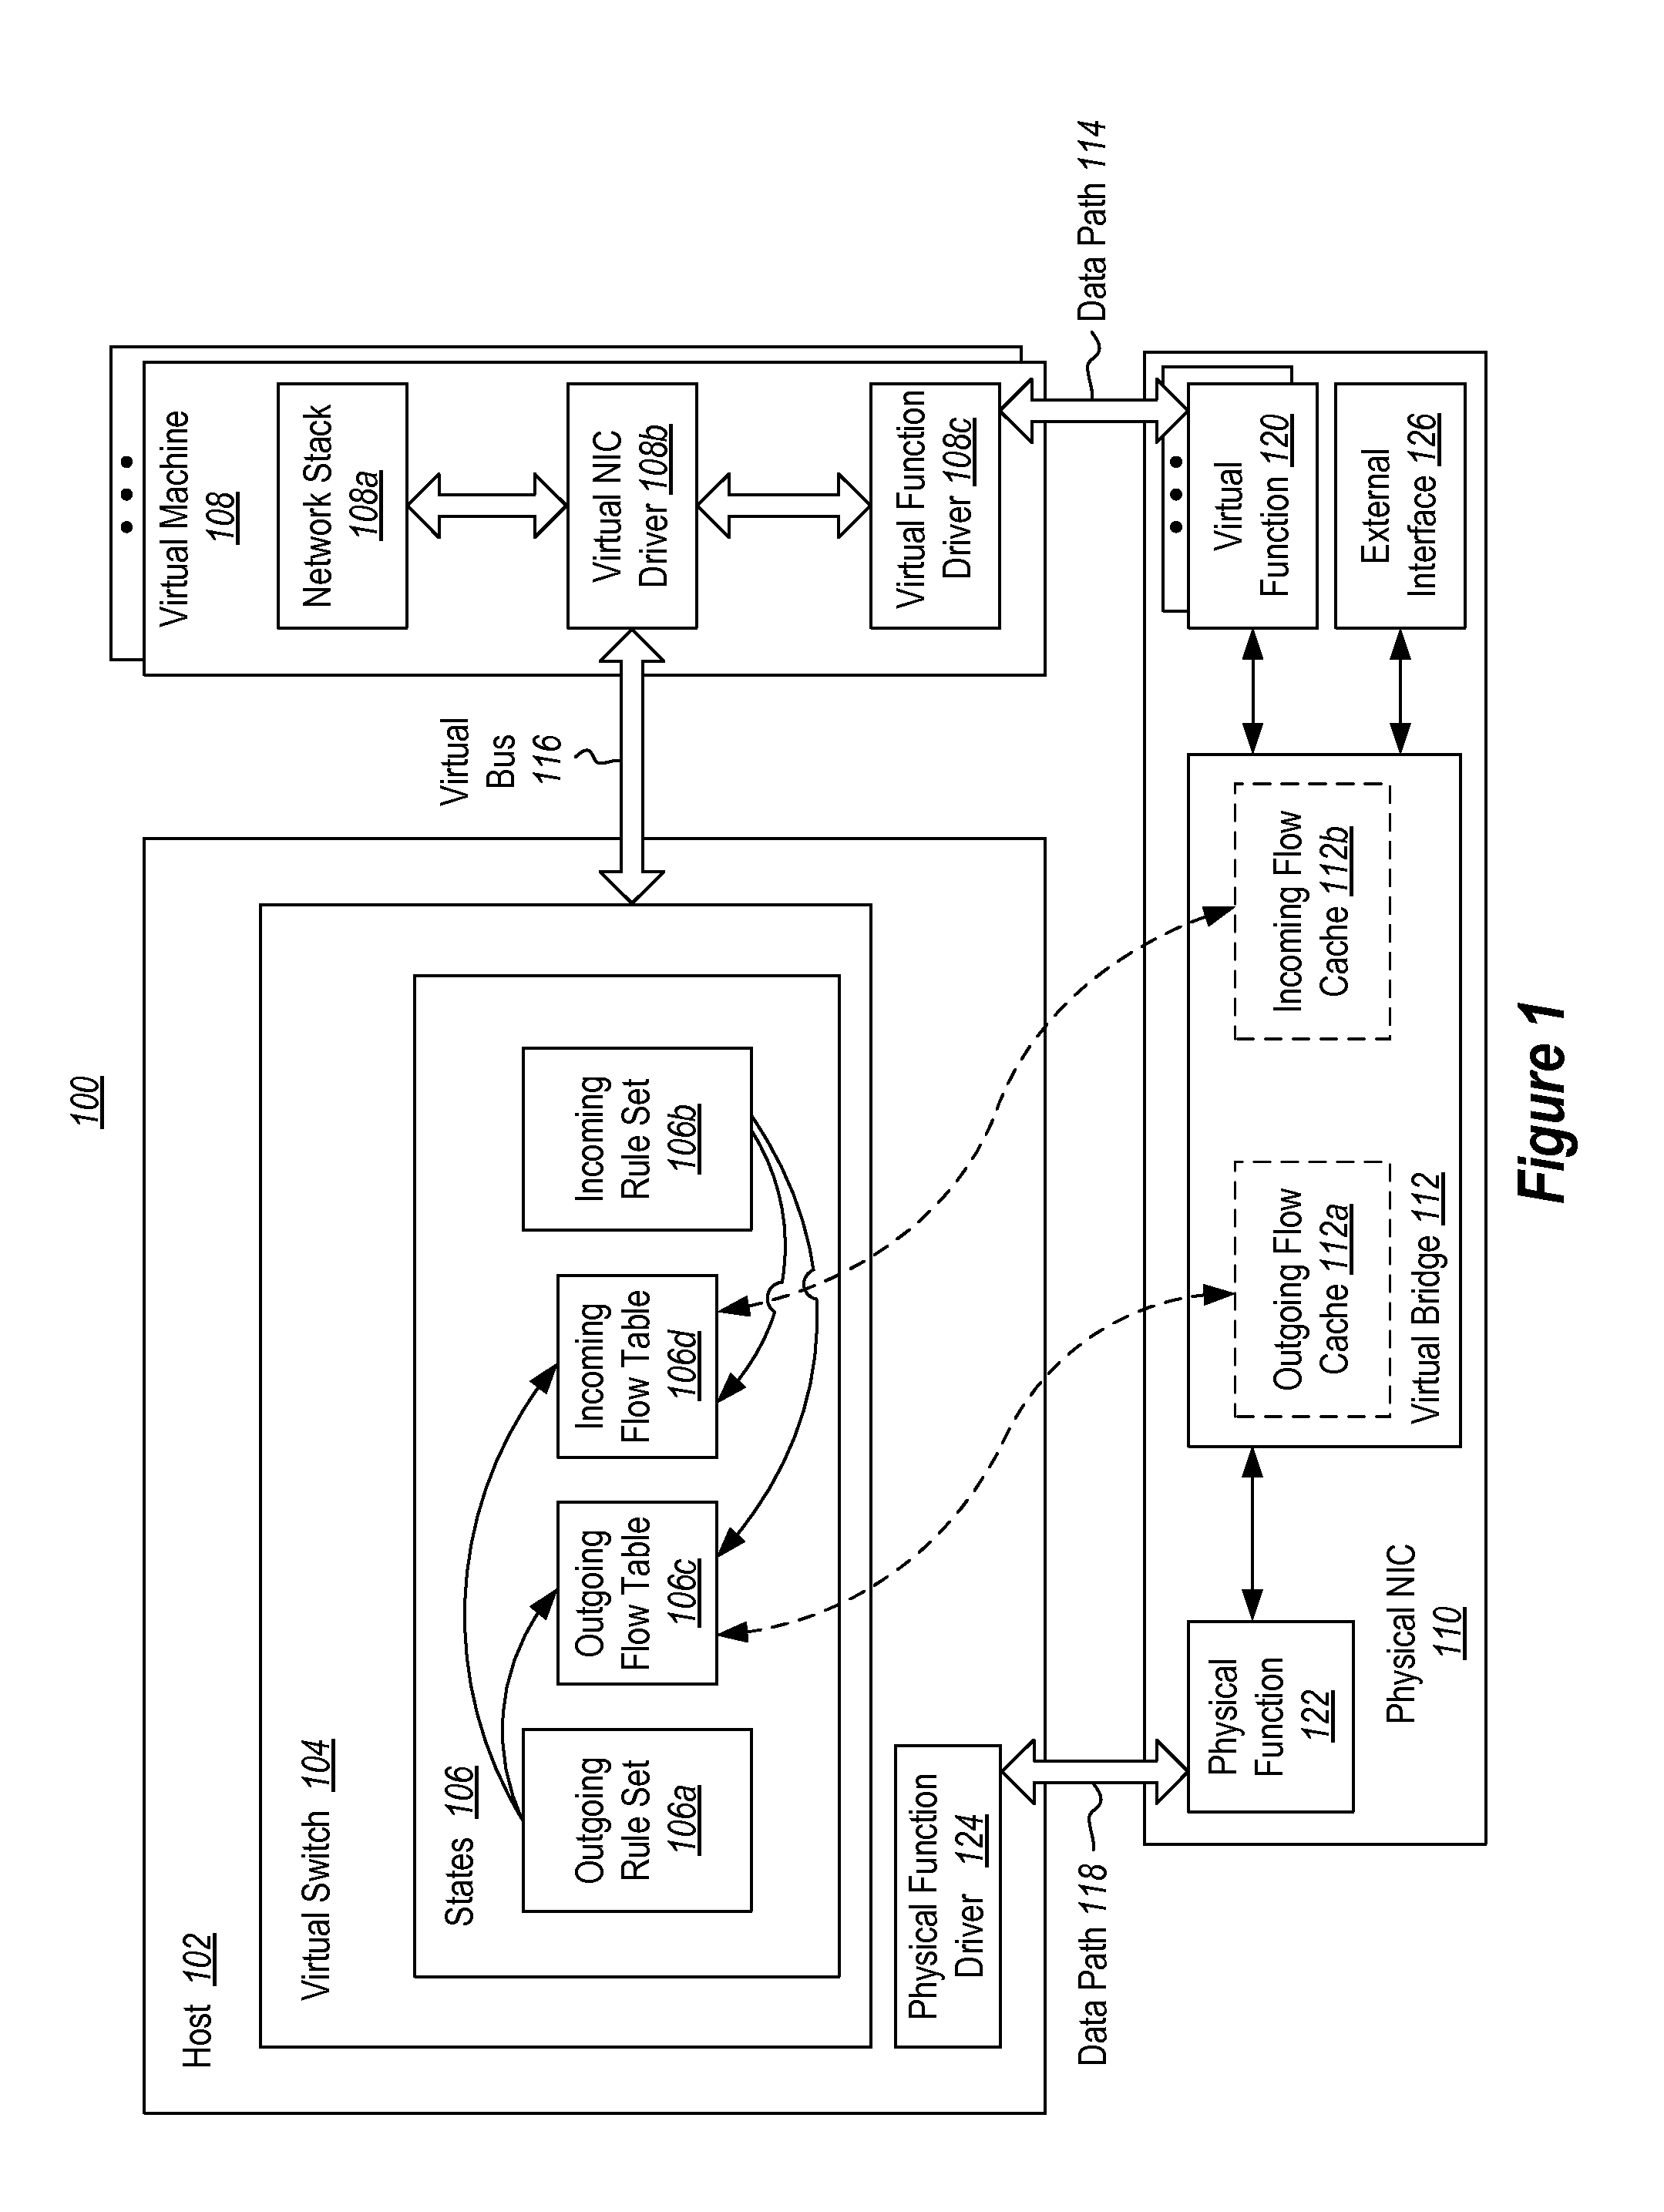 Offloading packet processing for networking device virtualization